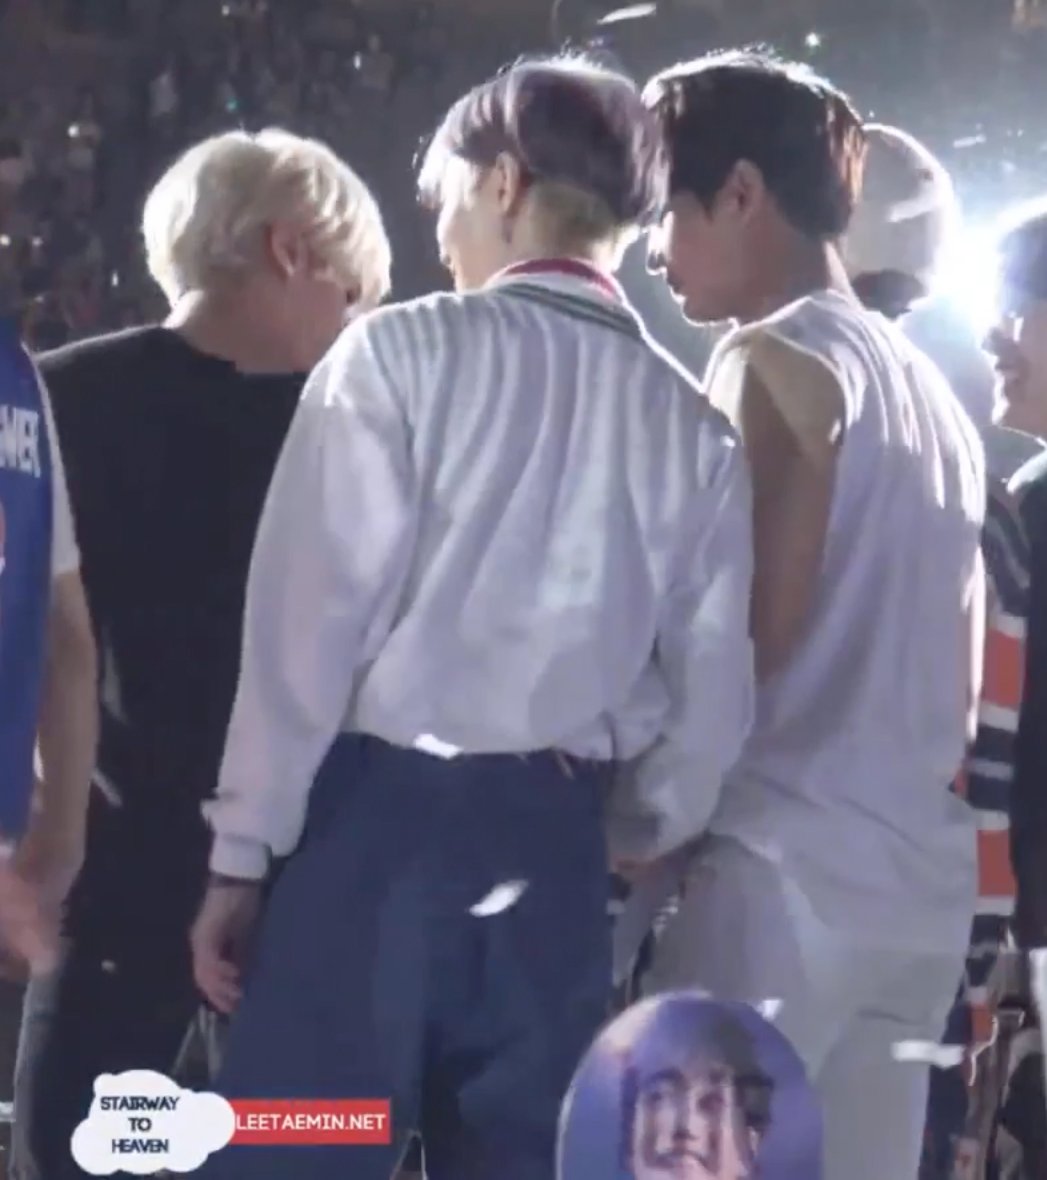 i really love how casual this moment feels,just 2min in their own world cr: in pic